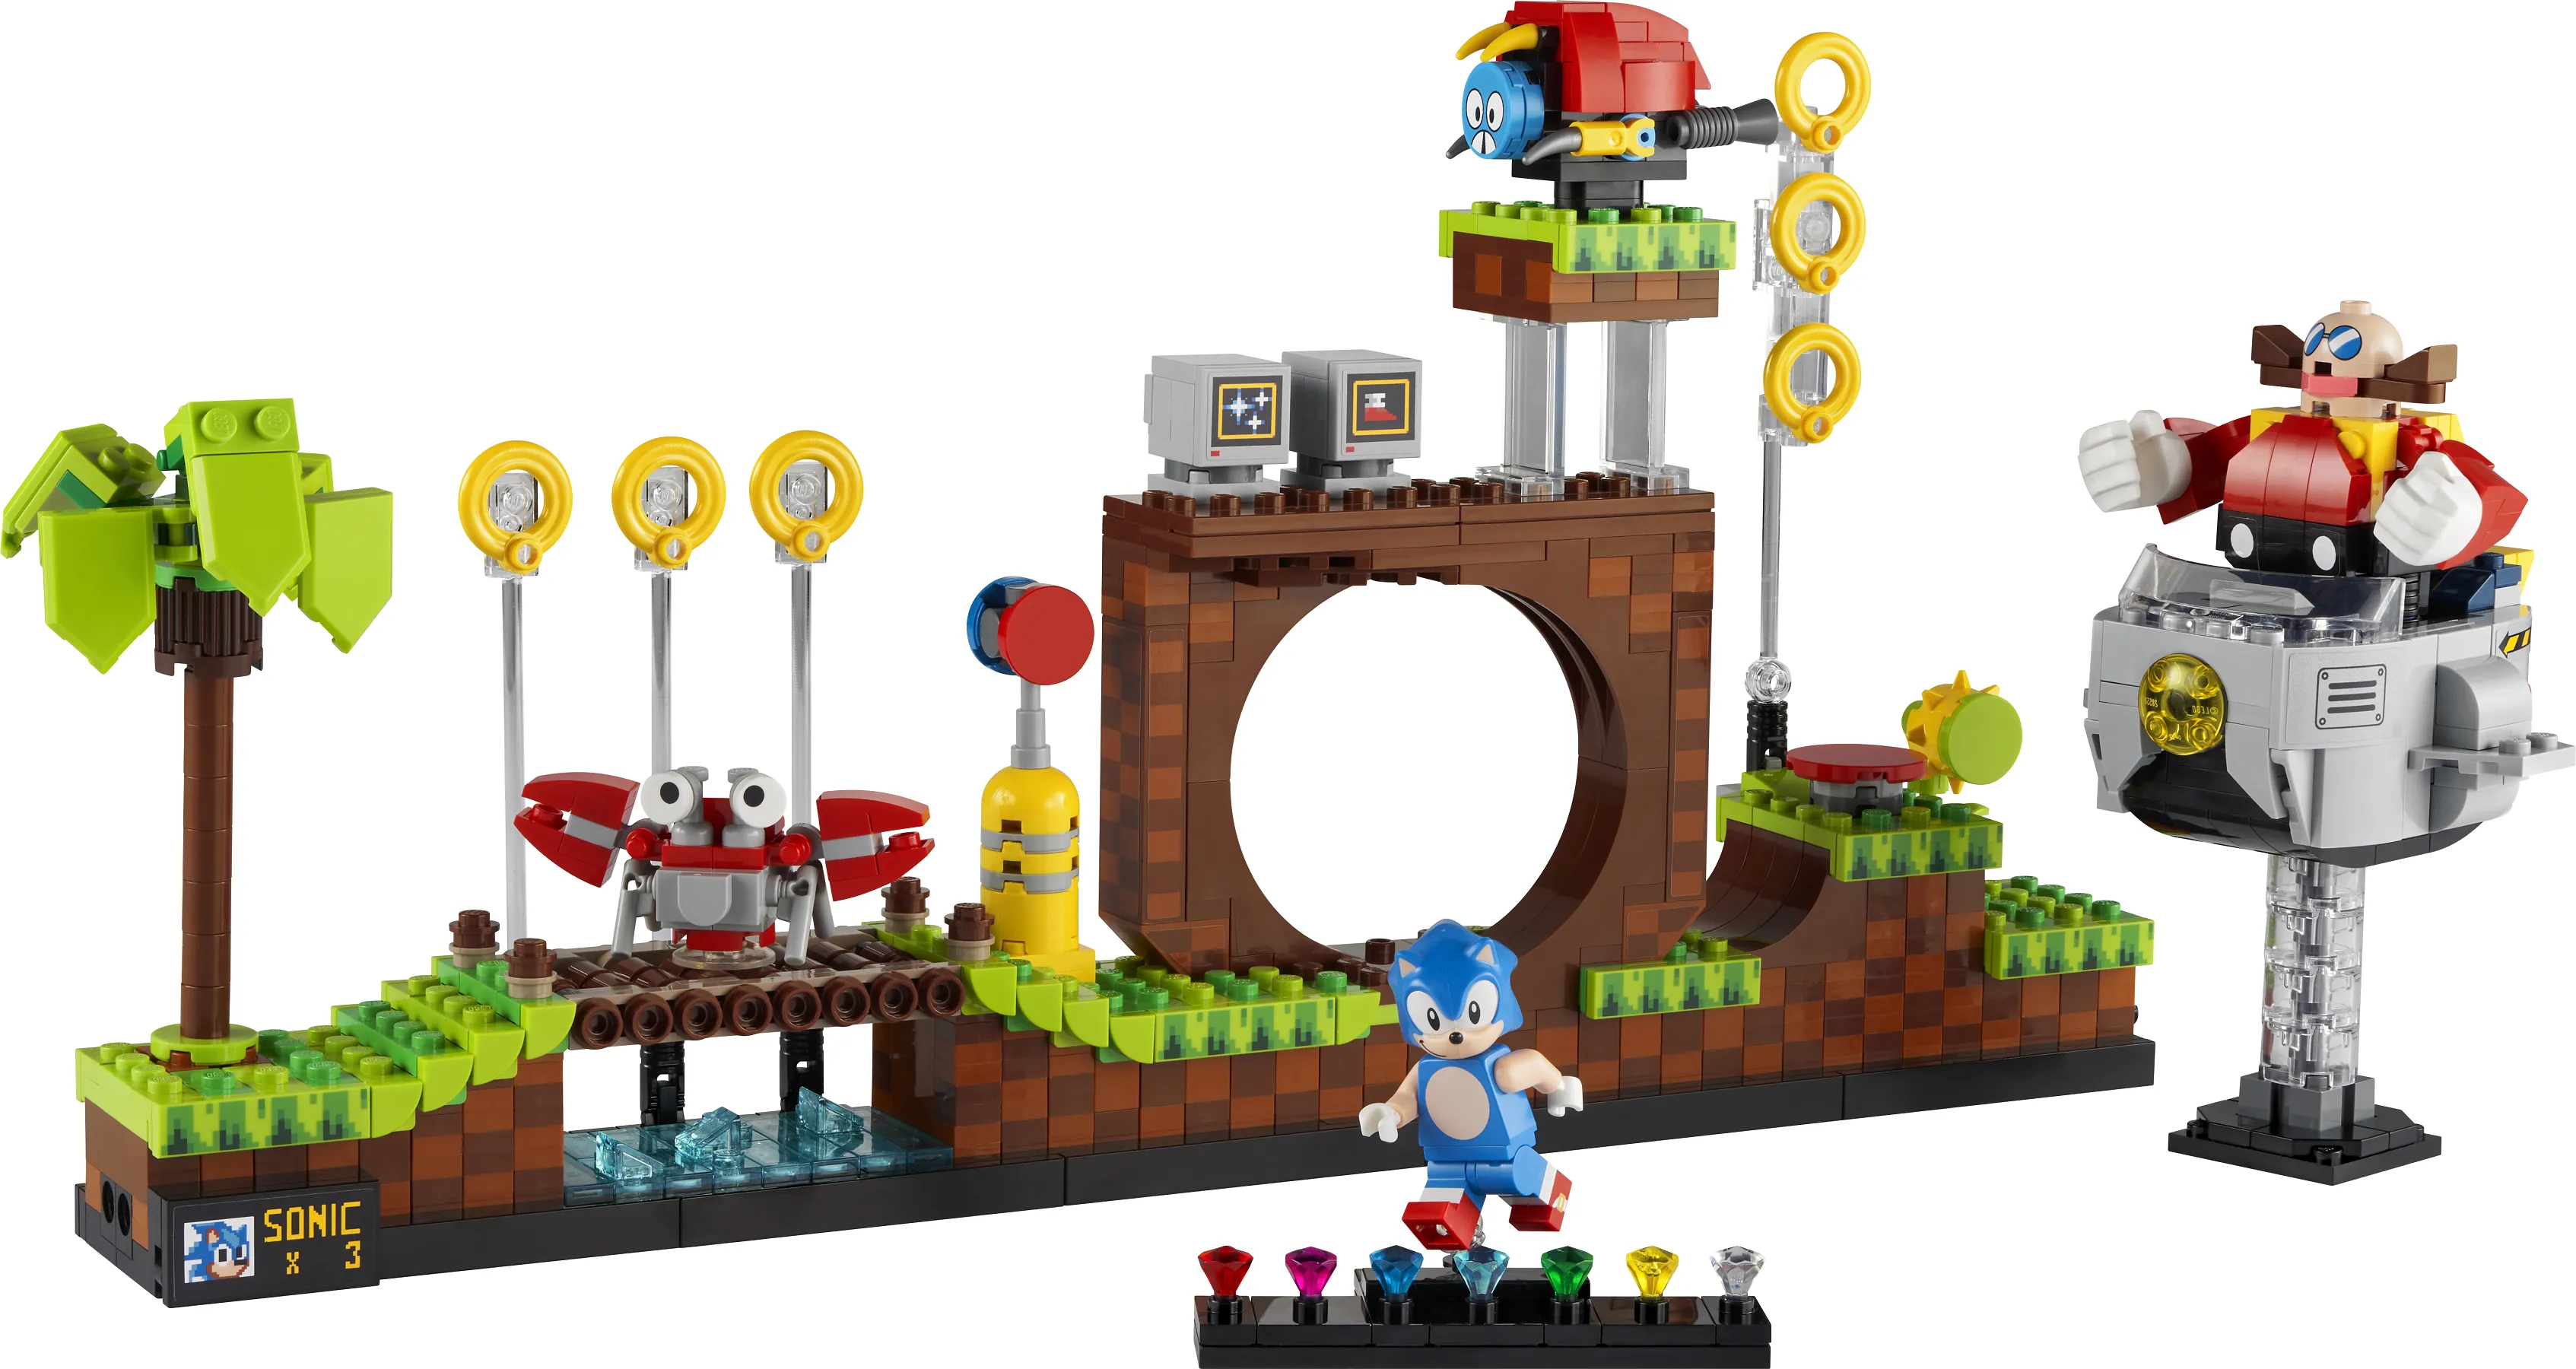 Here's how Sonic's Green Hill Zone looks in Lego Dimensions